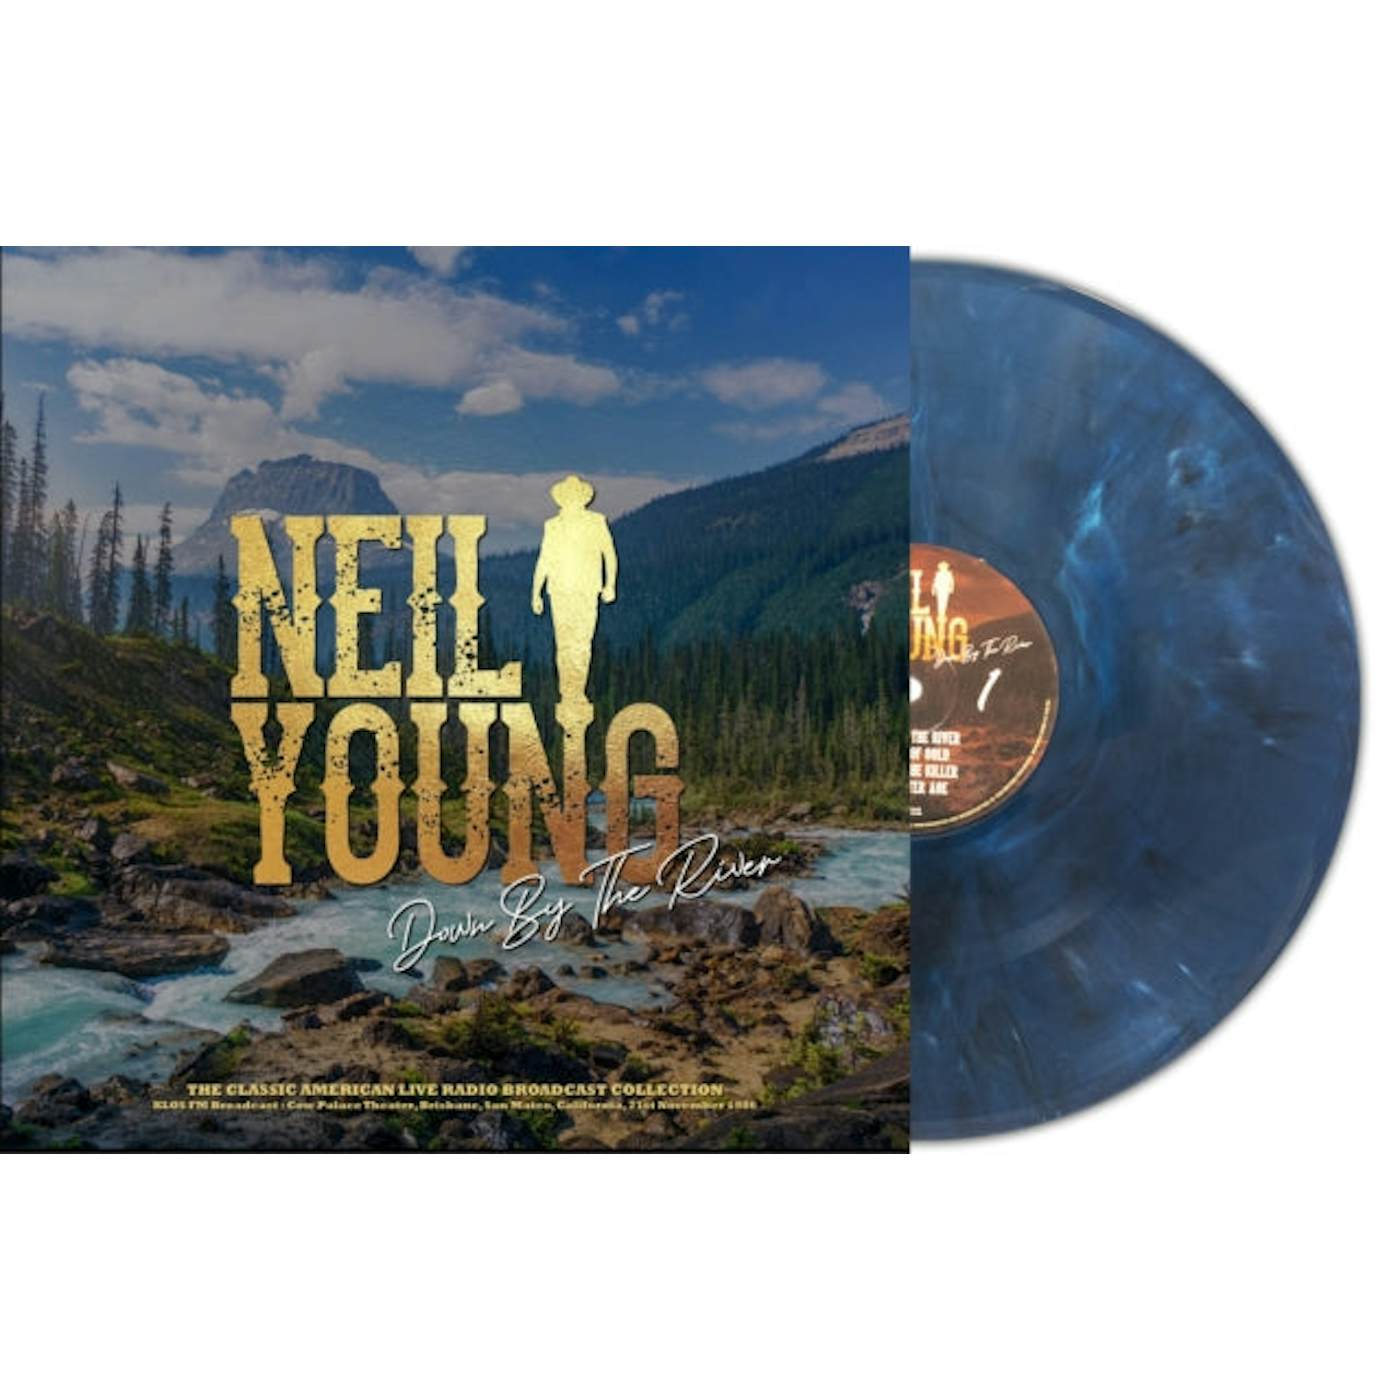 Neil Young LP Vinyl Record - Down By The River Klos FM Broadcast Cow Palace Theatre Brisbane San Mateo Ca 21st November 19 86 (Blue Marble Vinyl)